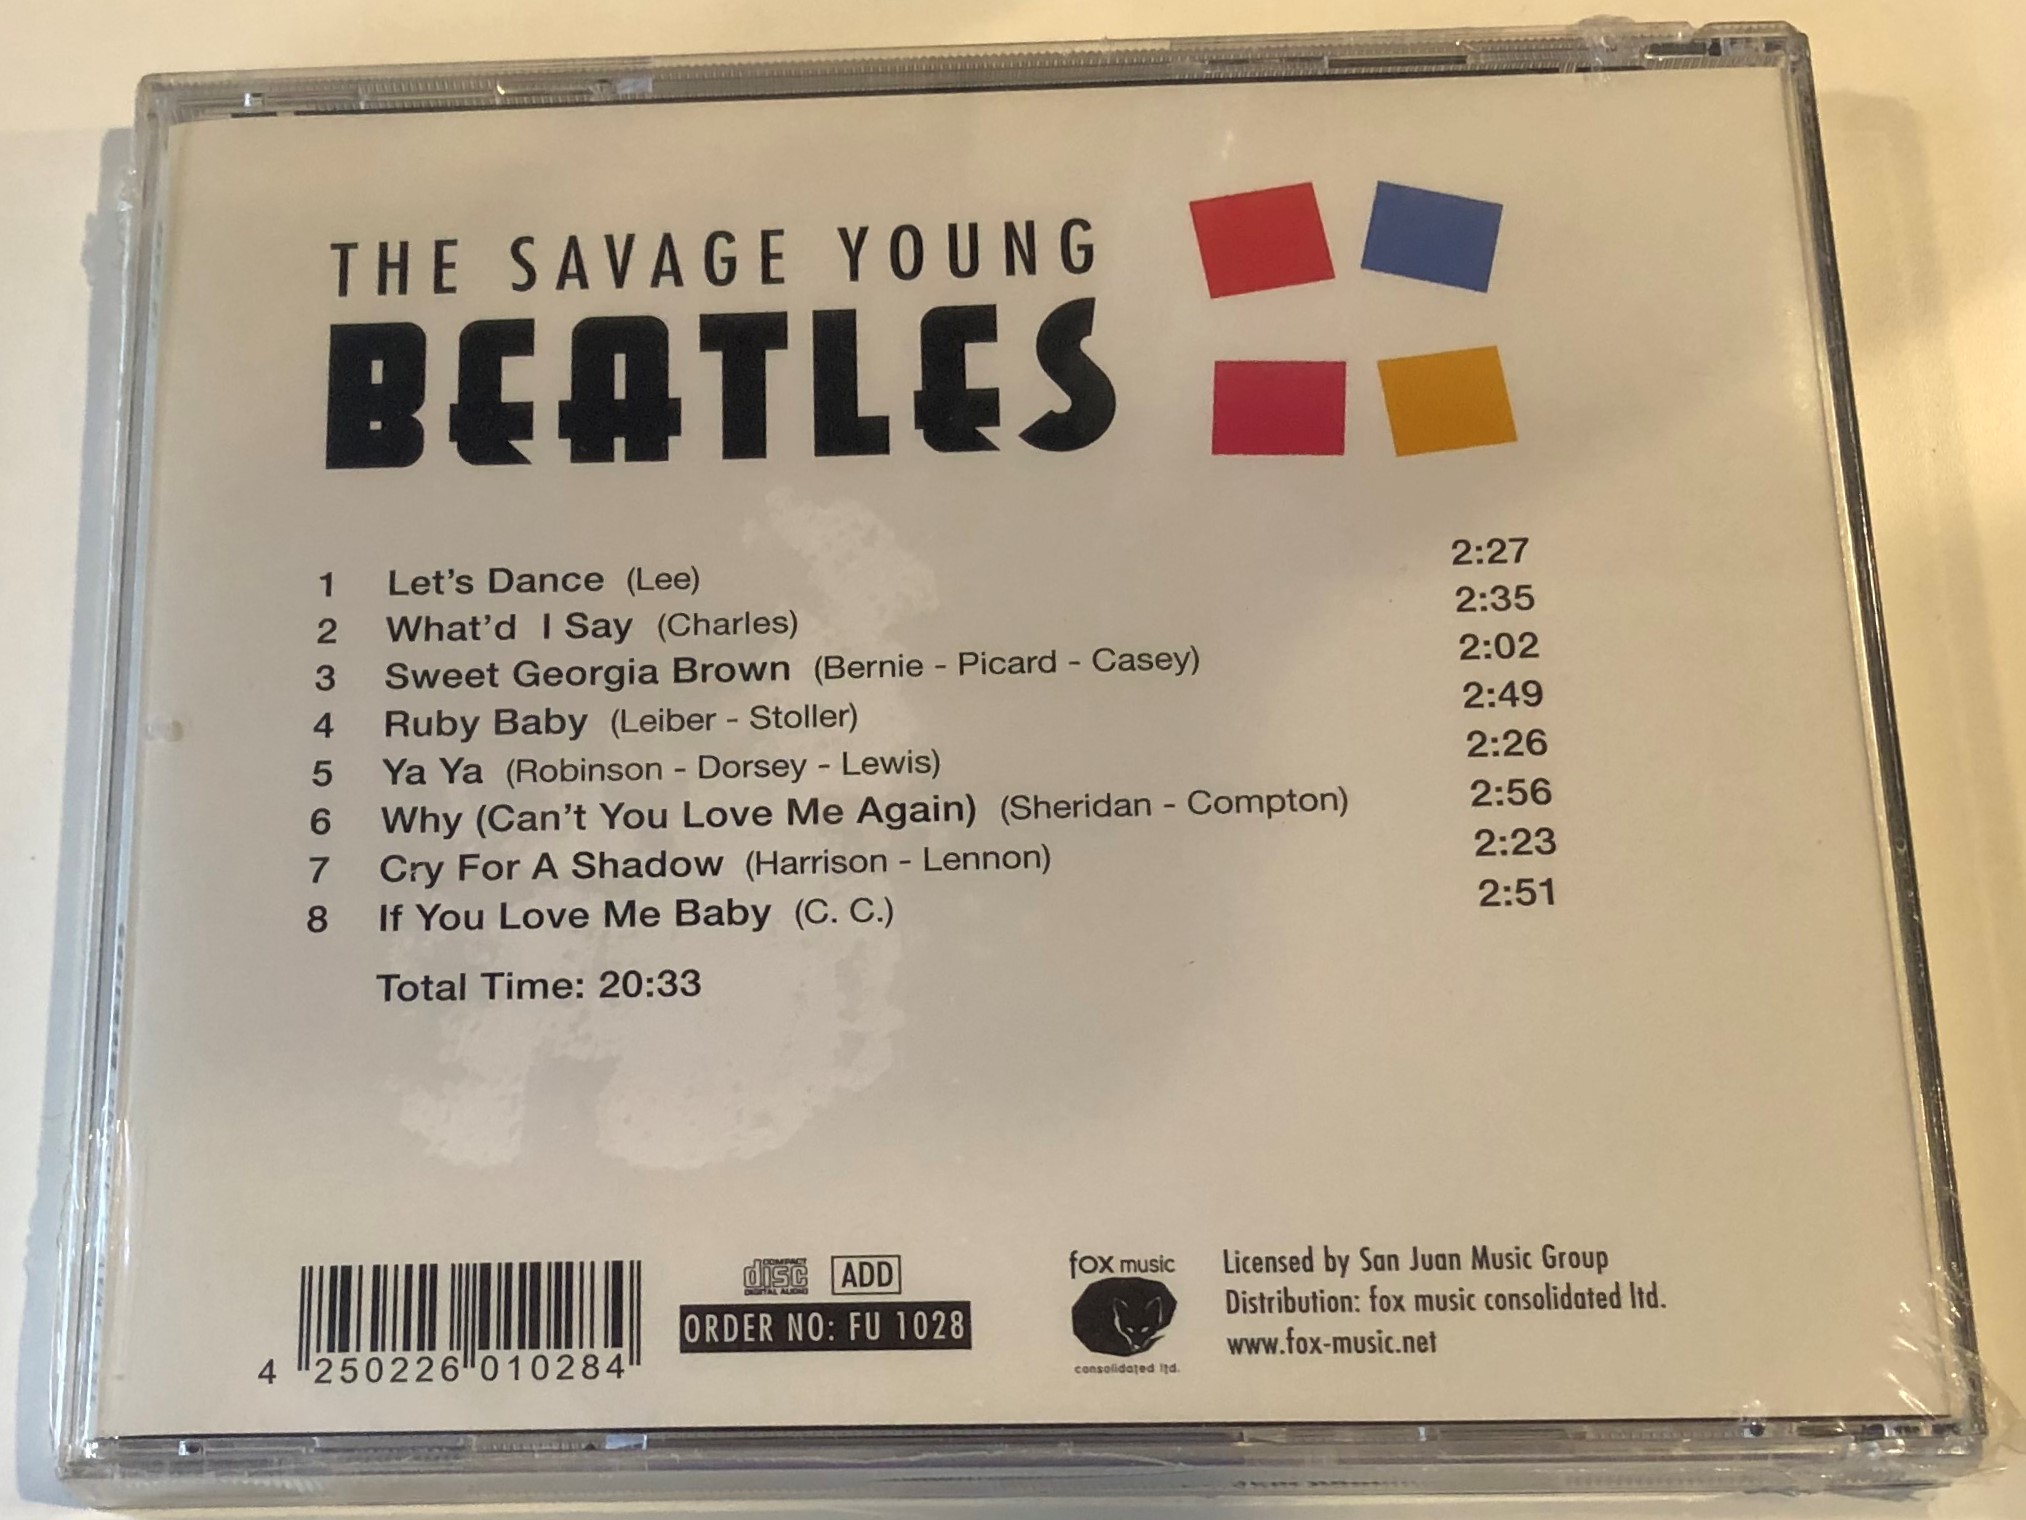 the-savage-young-beatles-fox-music-consolidated-ltd.-audio-cd-fu-1028-2-.jpg